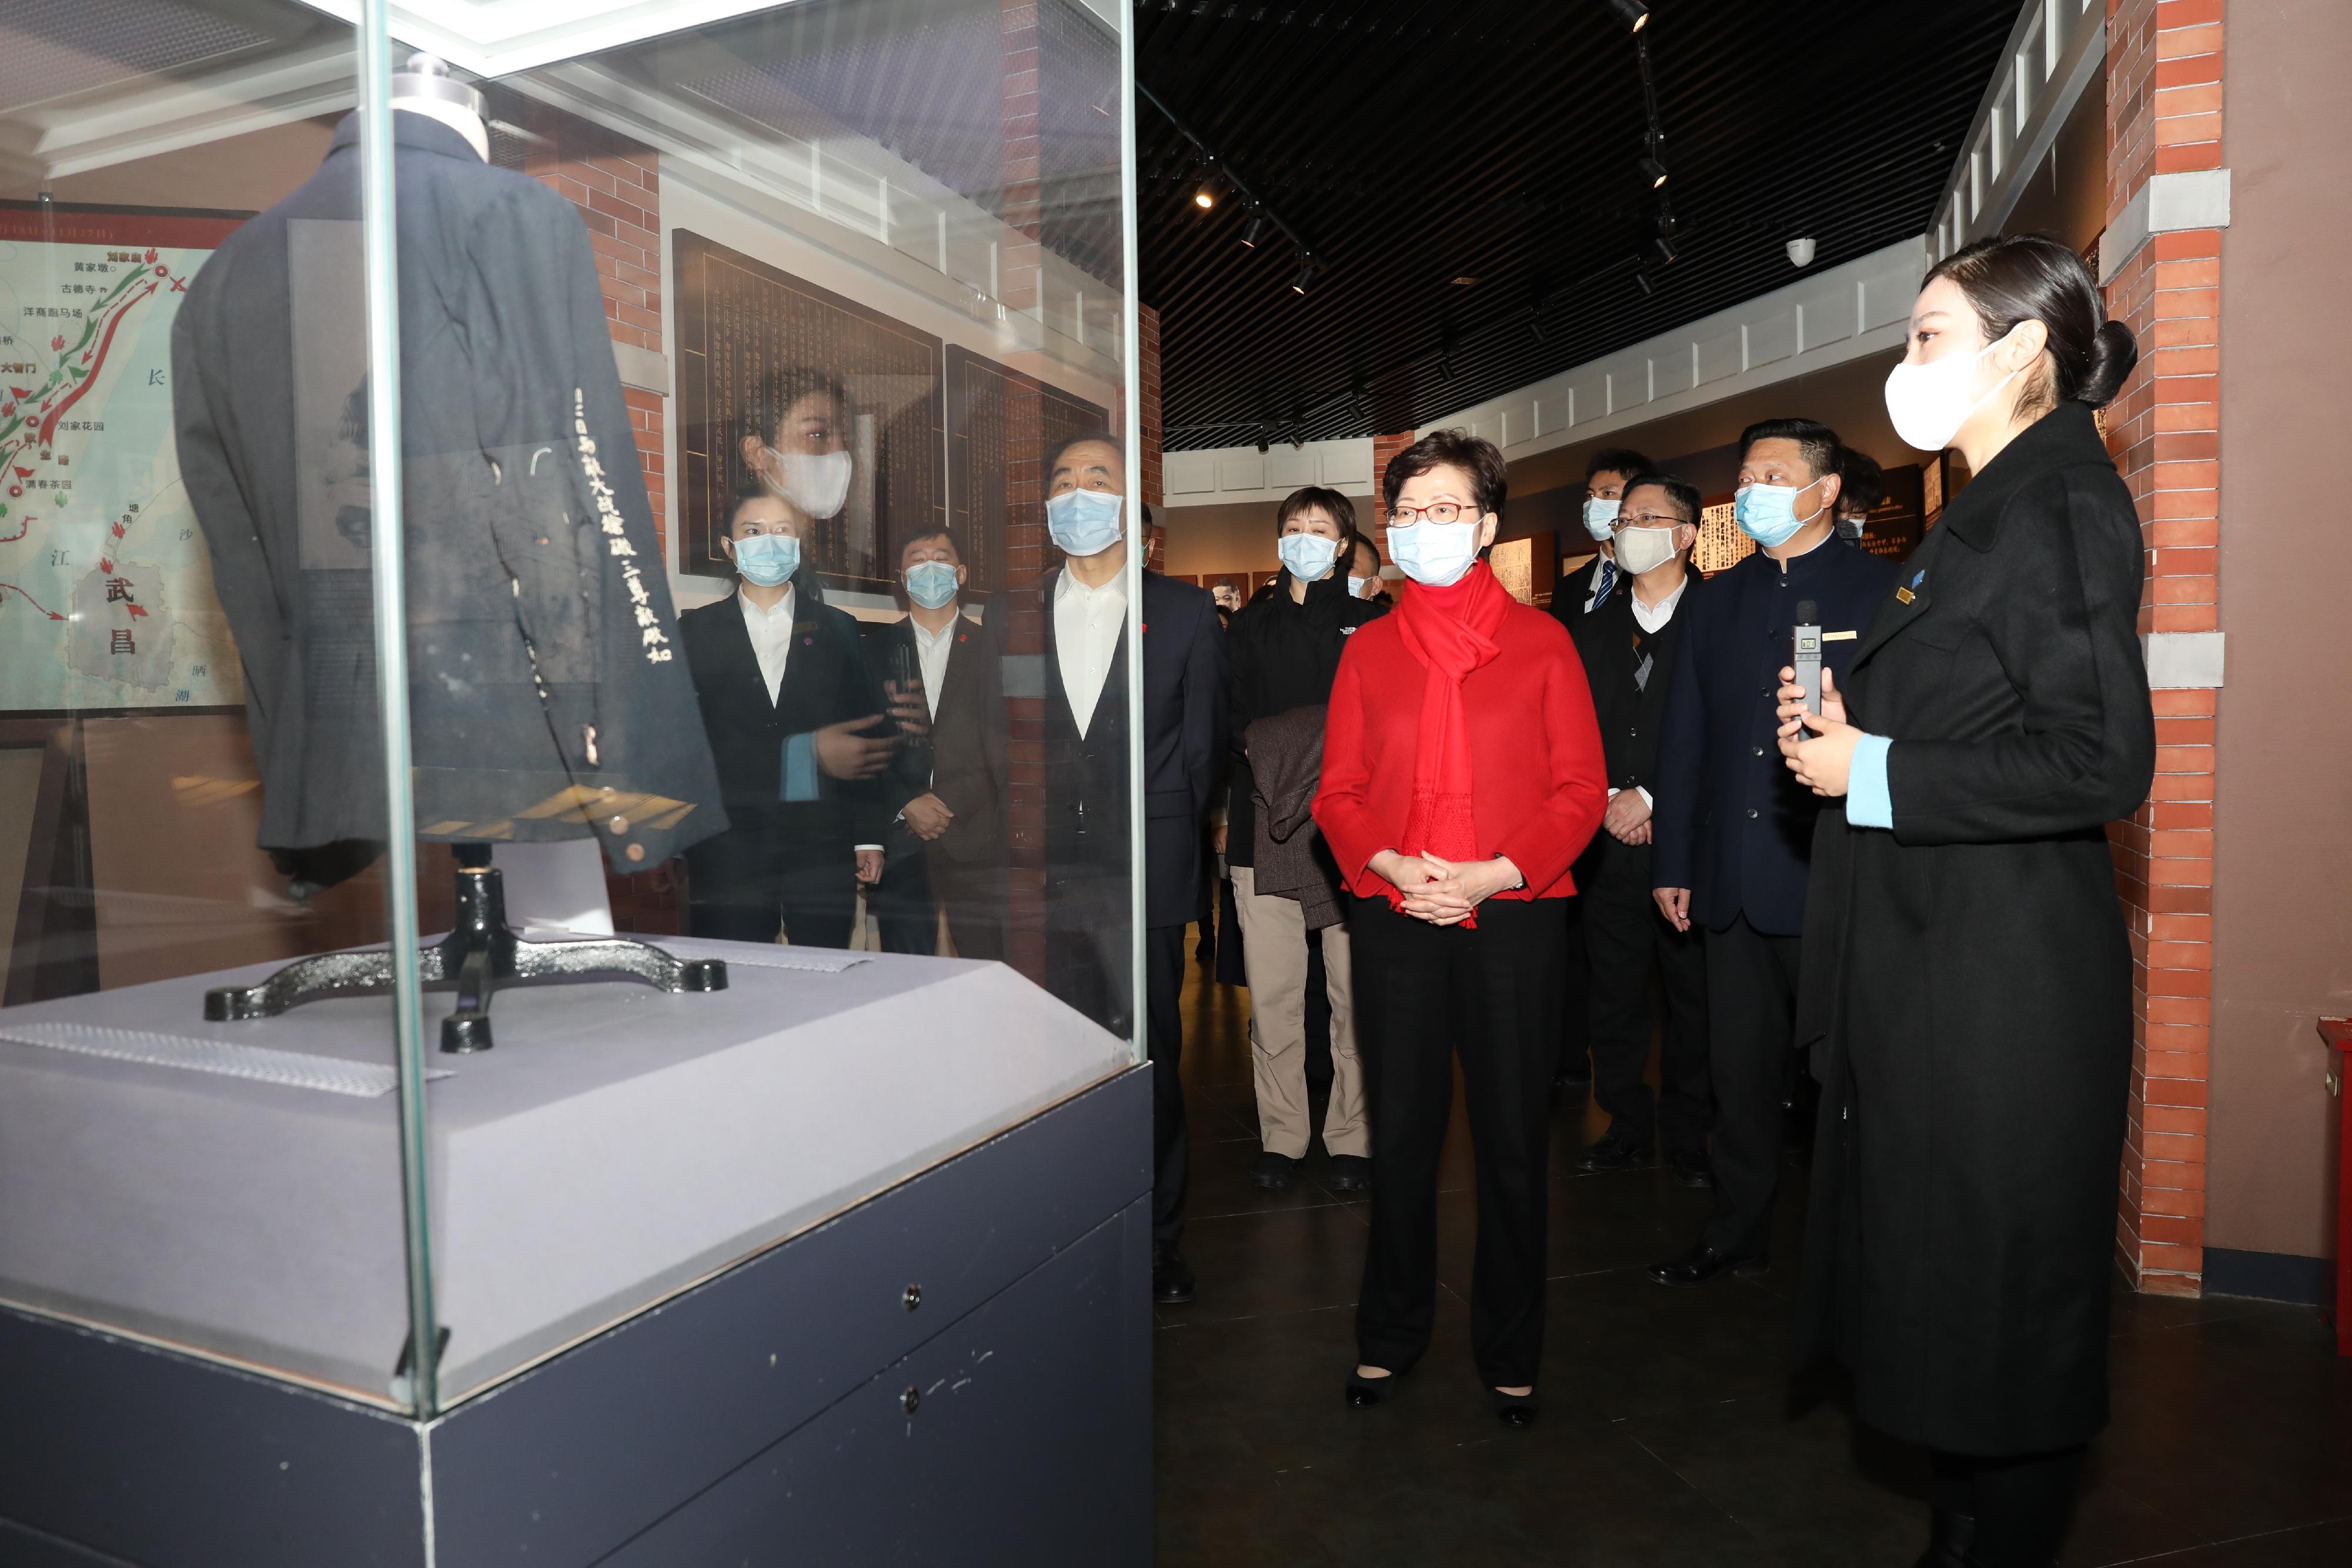 The Chief Executive, Mrs Carrie Lam, visited the Museum of Wuchang Uprising of 1911 Revolution in Wuhan today (November 30). Photo shows Mrs Lam (front, centre), accompanied by the Vice Governor of Hubei Province, Mr Zhao Haishan (front, left), viewing exhibits in the museum.